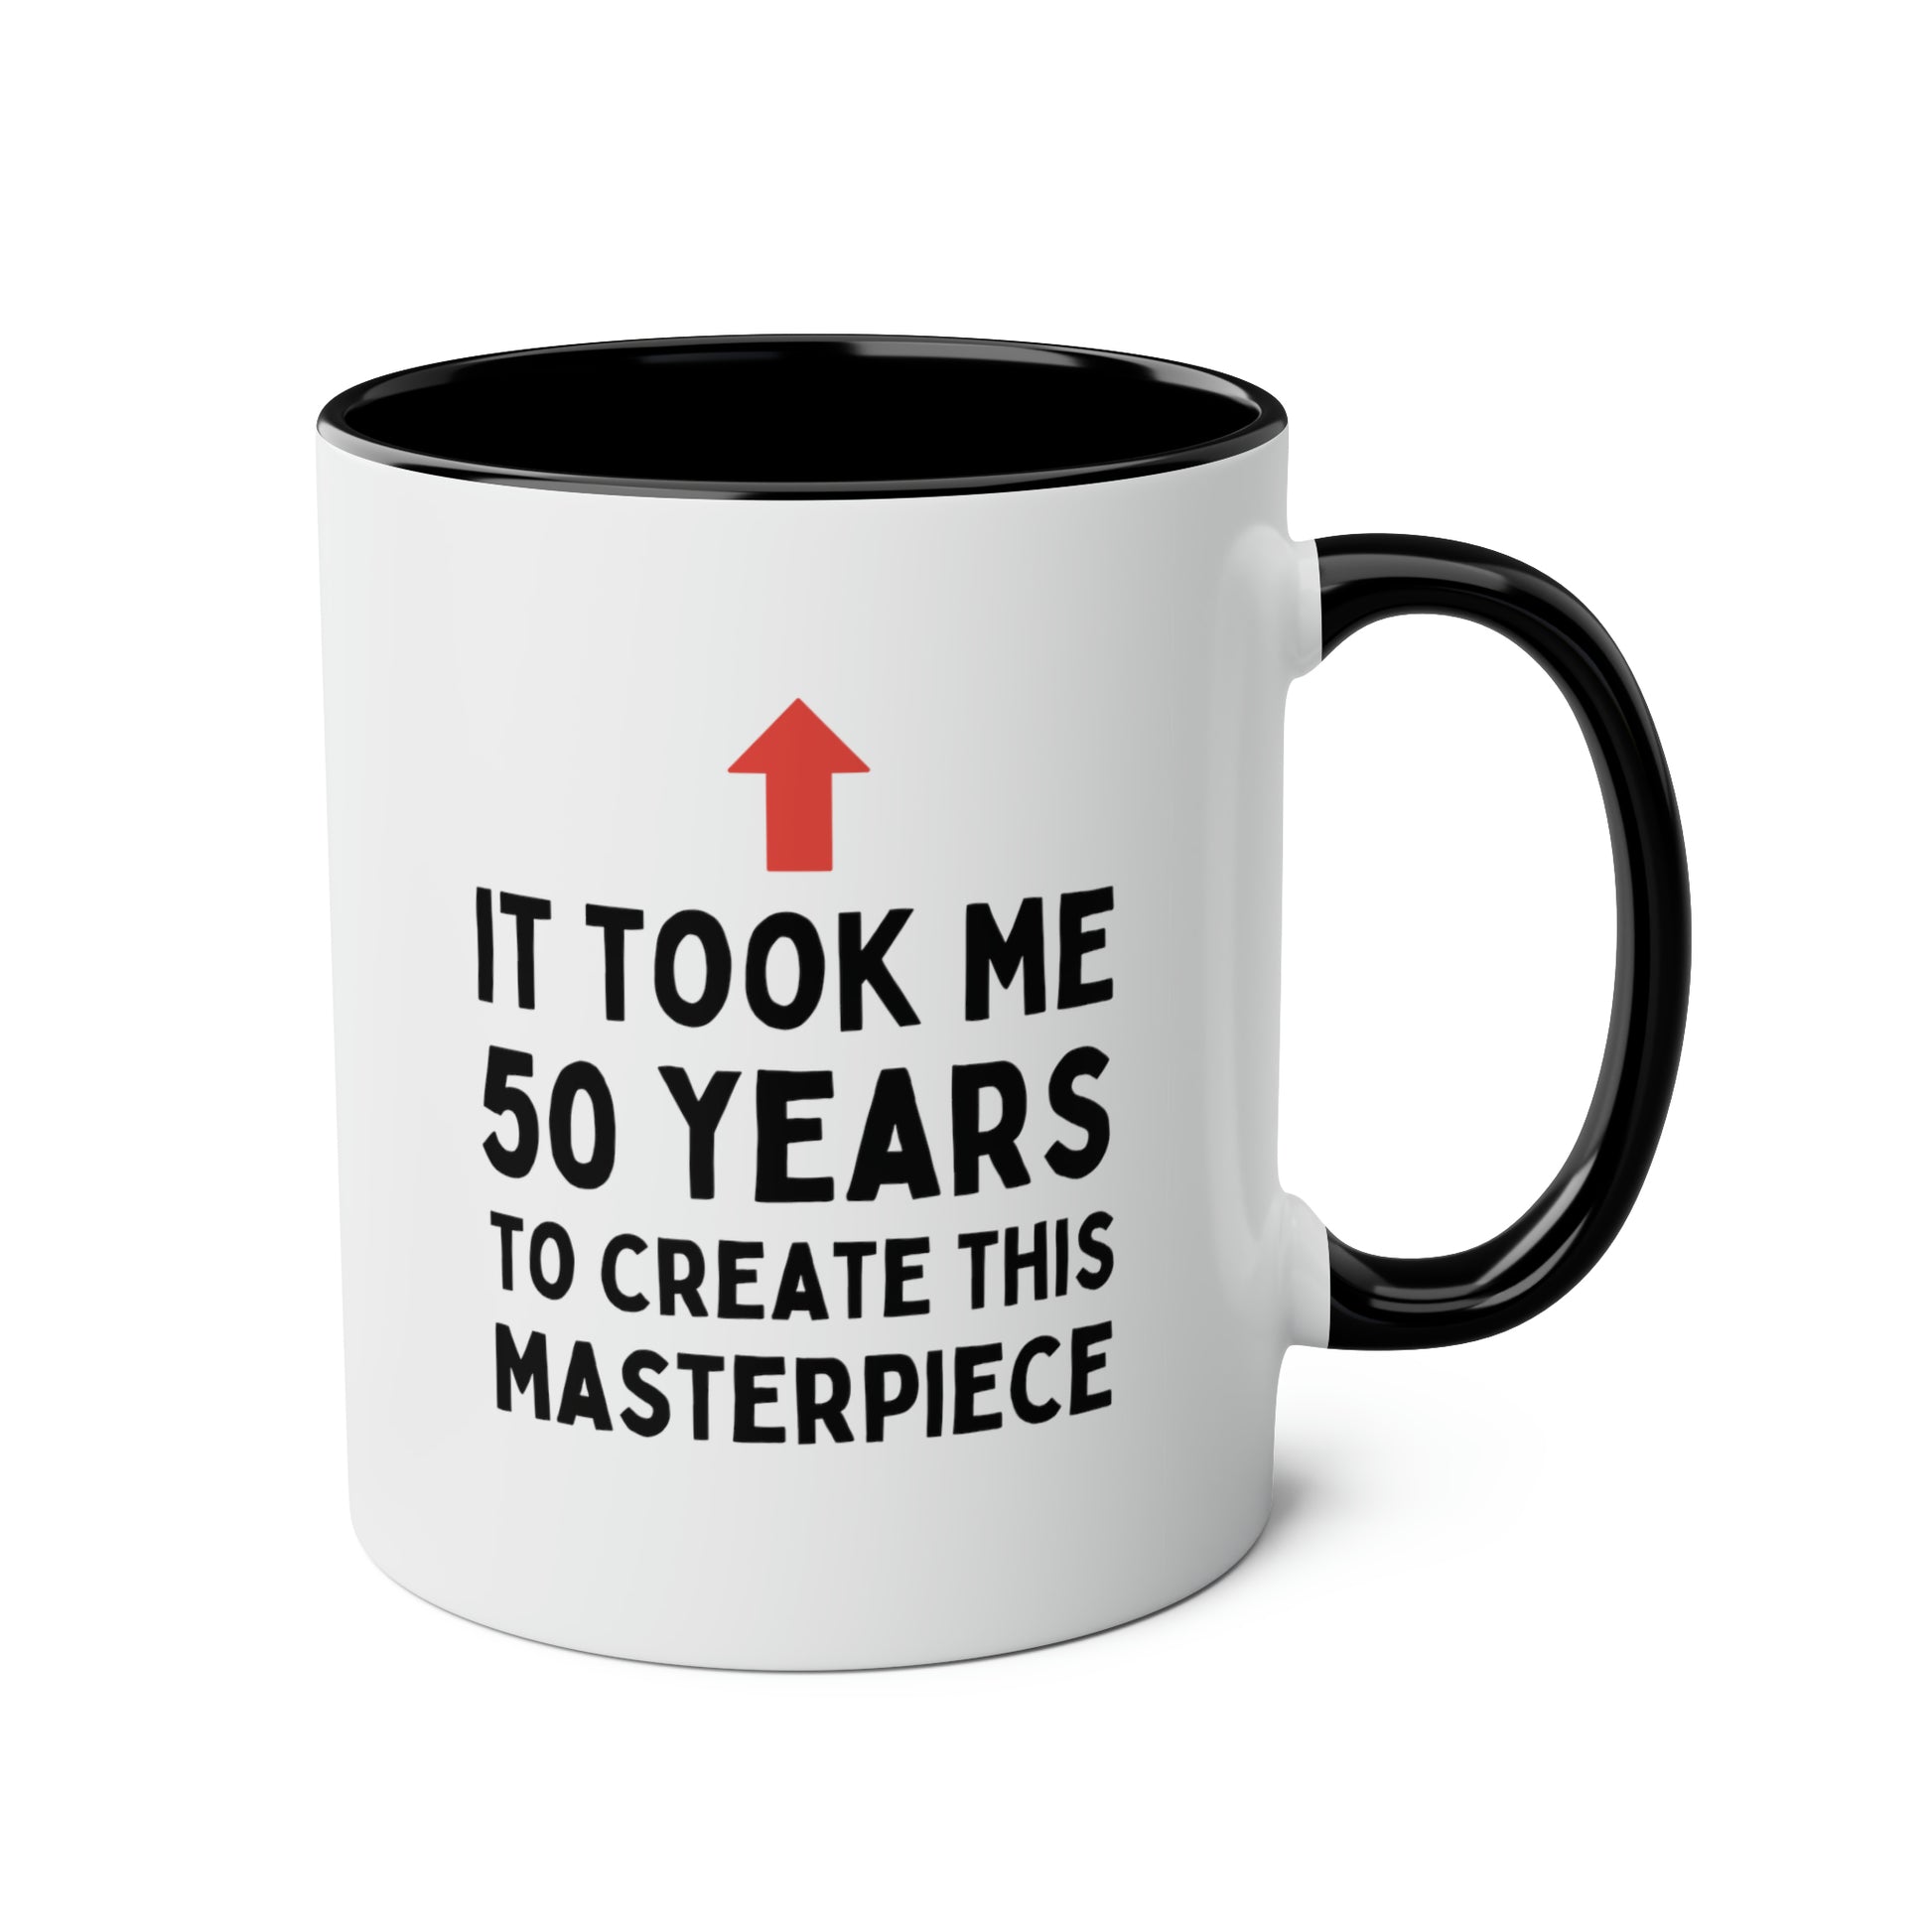 It Took Me 50 Years To Create This Masterpiece 11oz white with black accent funny large coffee mug gift for birthday custom date waveywares wavey wares wavywares wavy wares